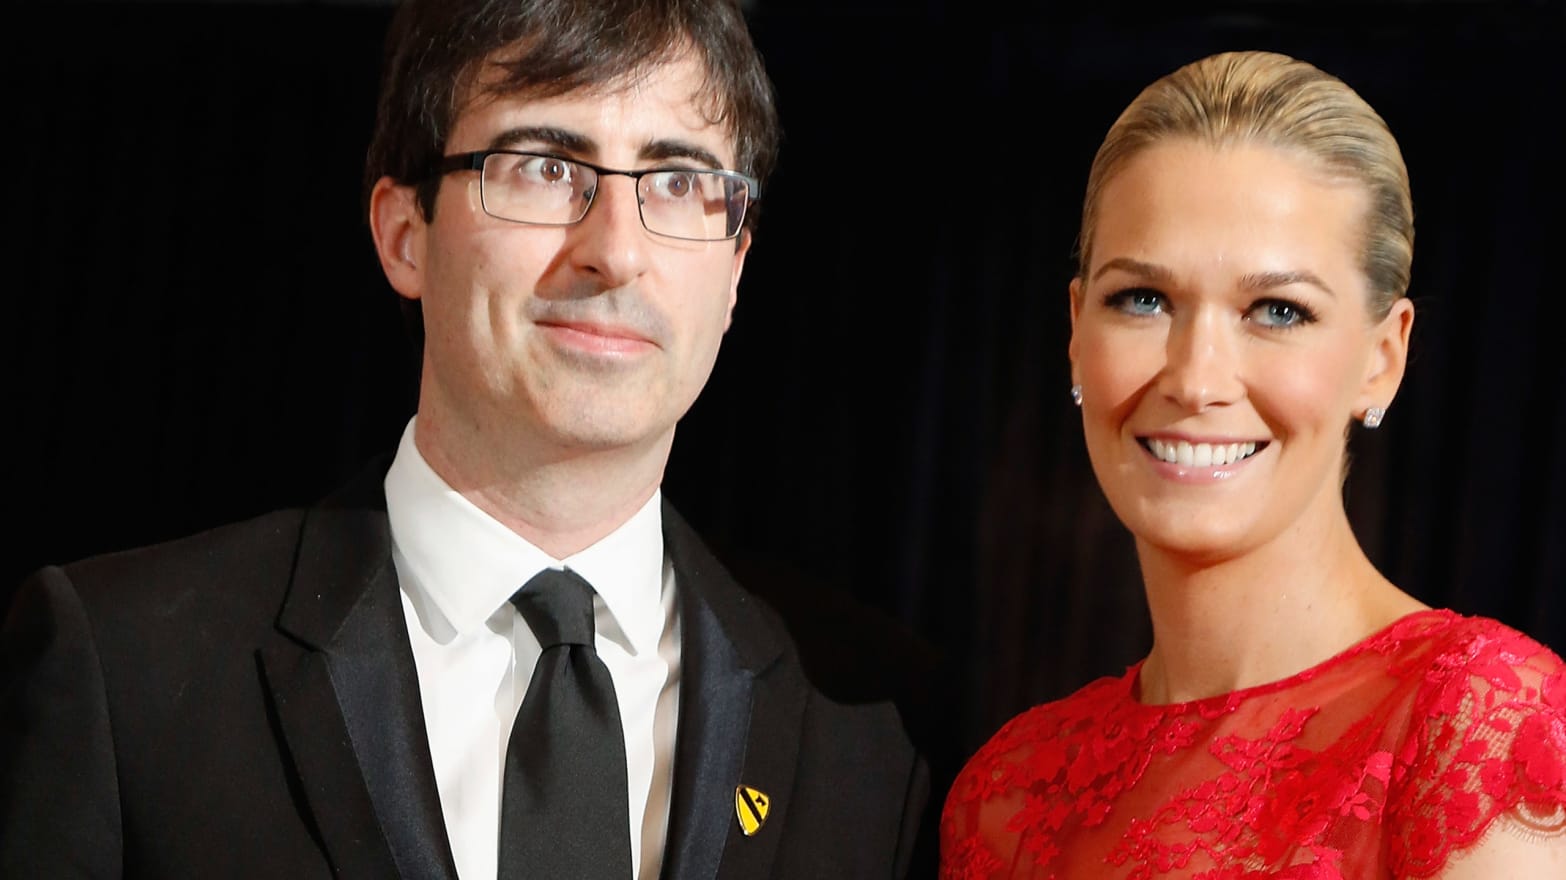 Who Is John Oliver's Wife? All About Kate Norley